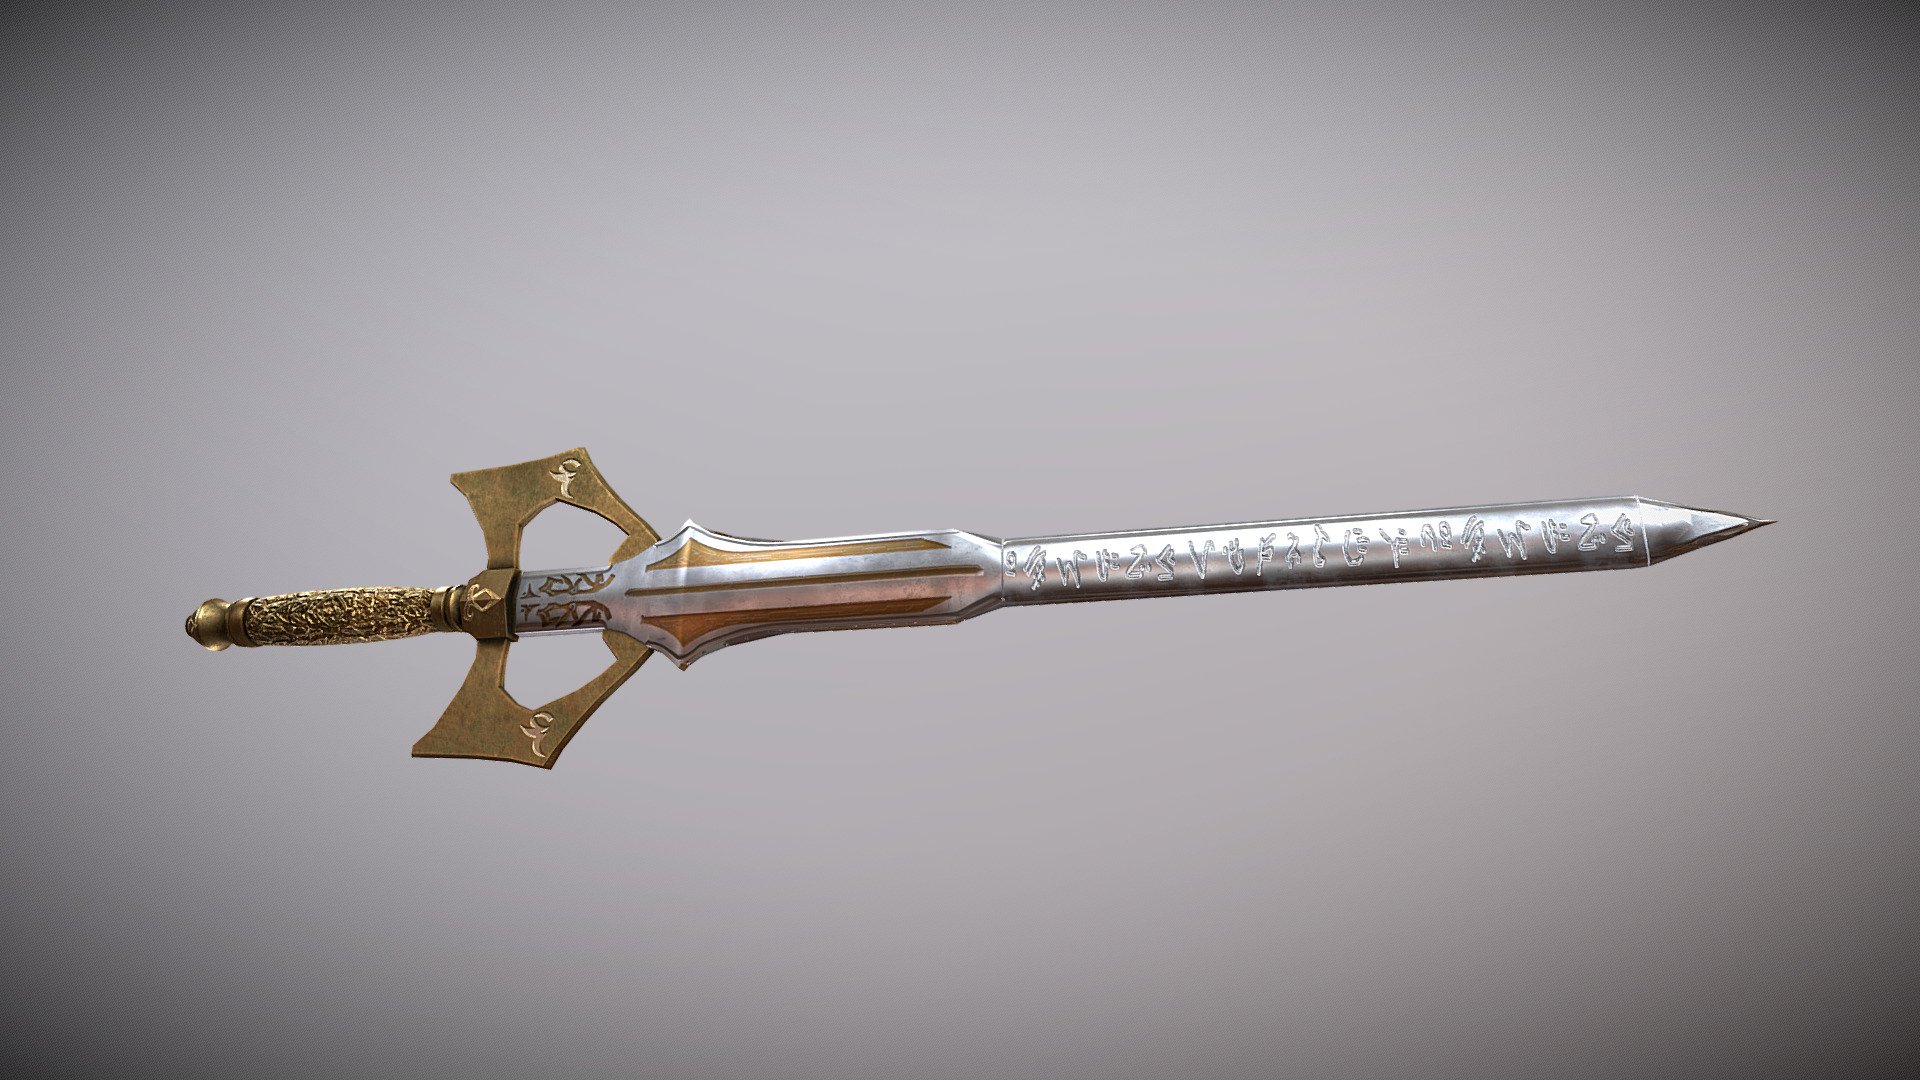 The Mortal sword or the SoulSword from Shadowhunters&hellip; just for the fun of it - The Soul Sword - 3D model by Thunder (@thunderpwn) 3d model